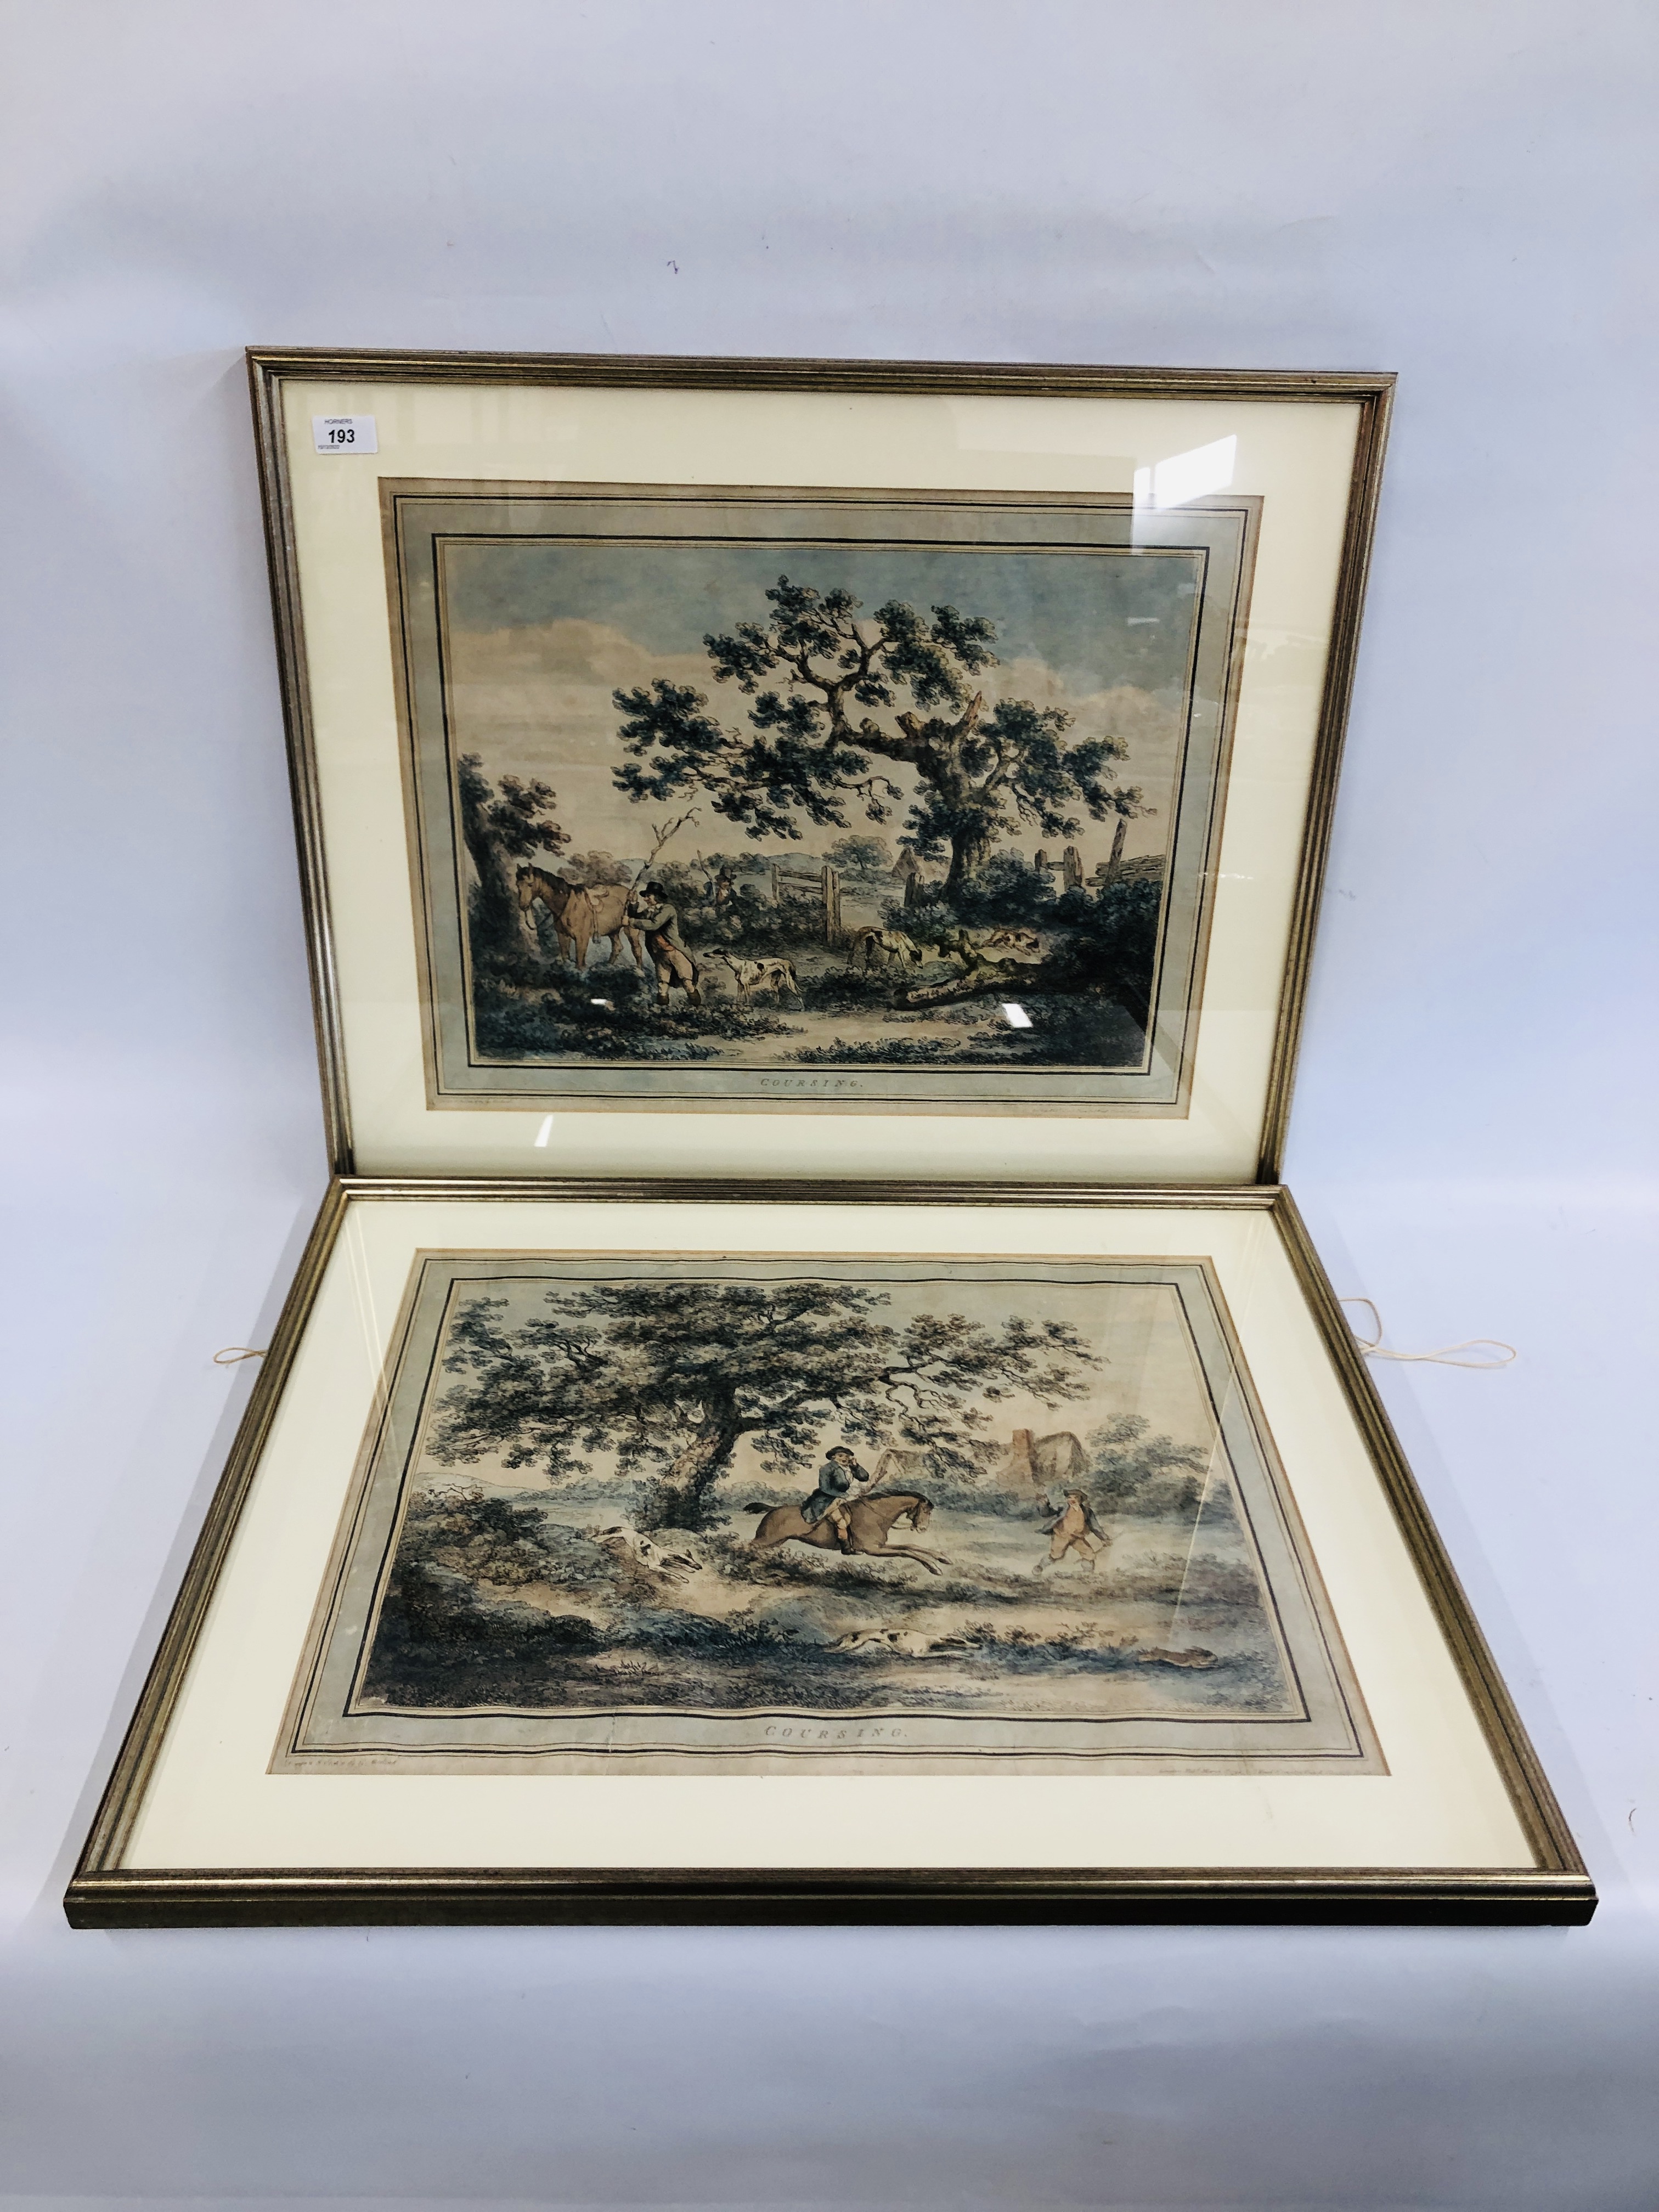 TWO HAND COLOURED ENGRAVINGS HUNTING SCENES "COURSING" FRAMED AND MOUNTED EACH 43CM X 55CM.